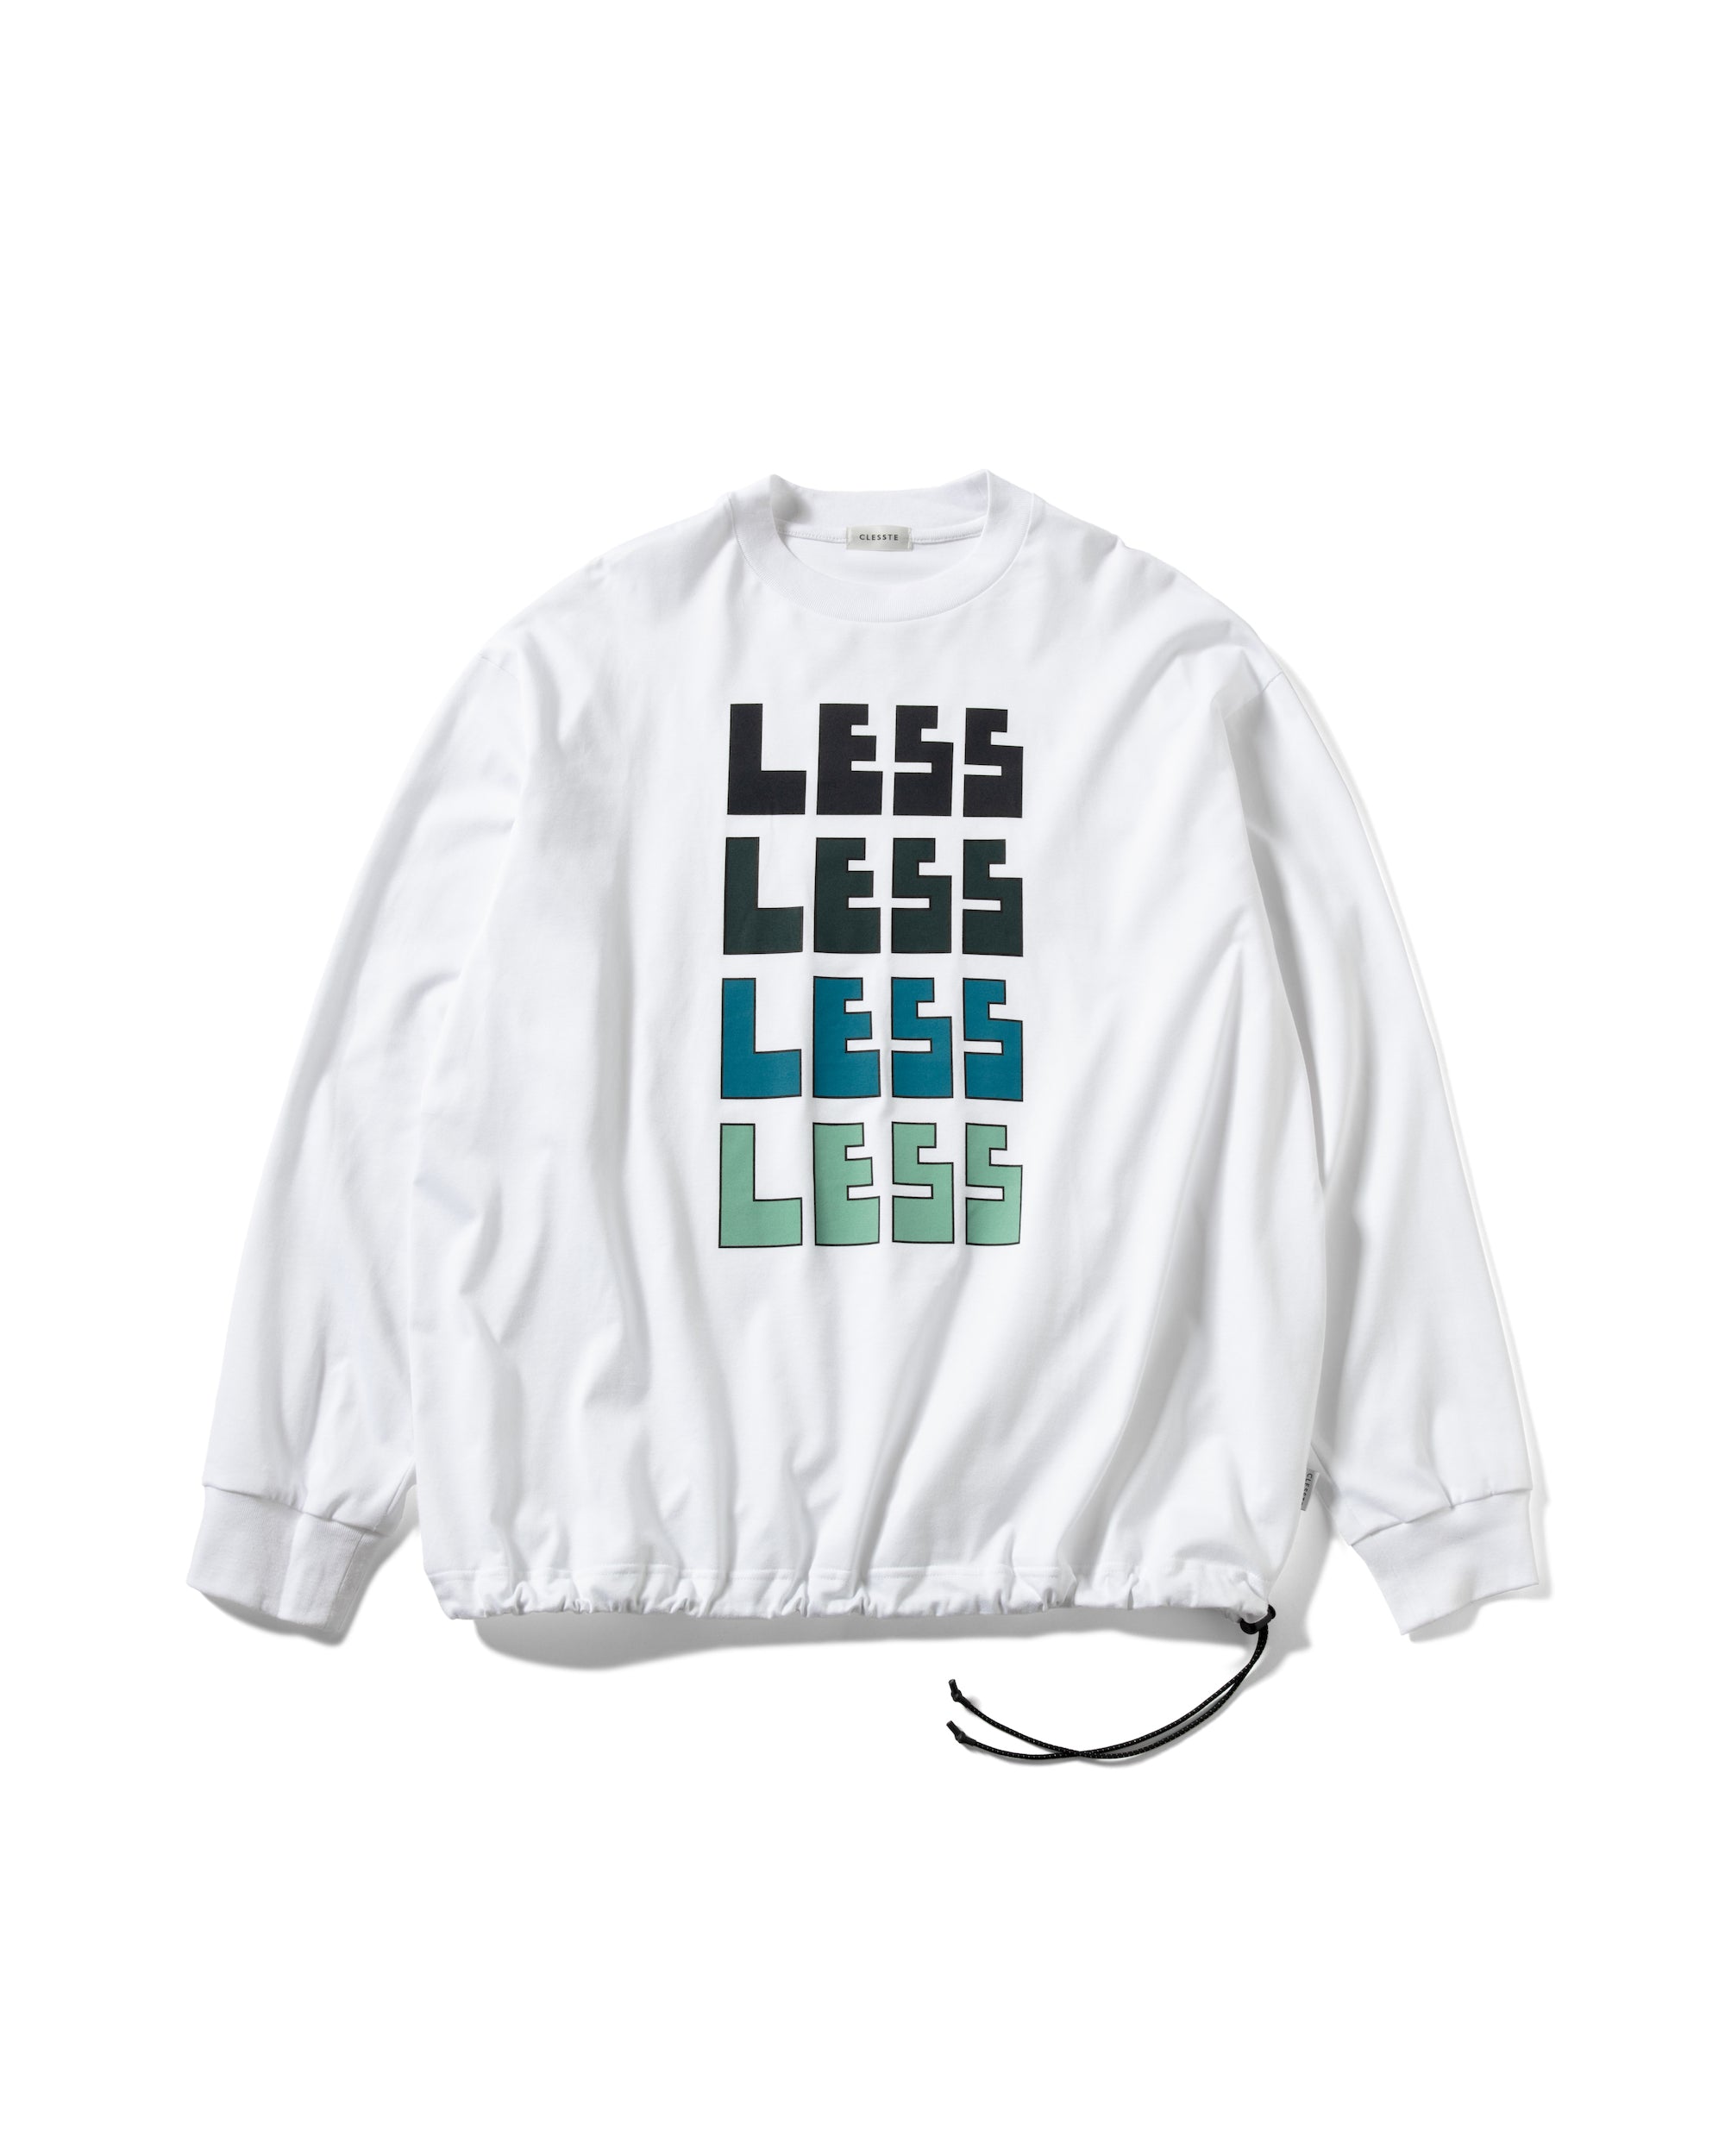 【4.17WED 20:00- IN STOCK】"LESS" MASSIVE L/S T-SHIRT WITH DRAWSTRINGS